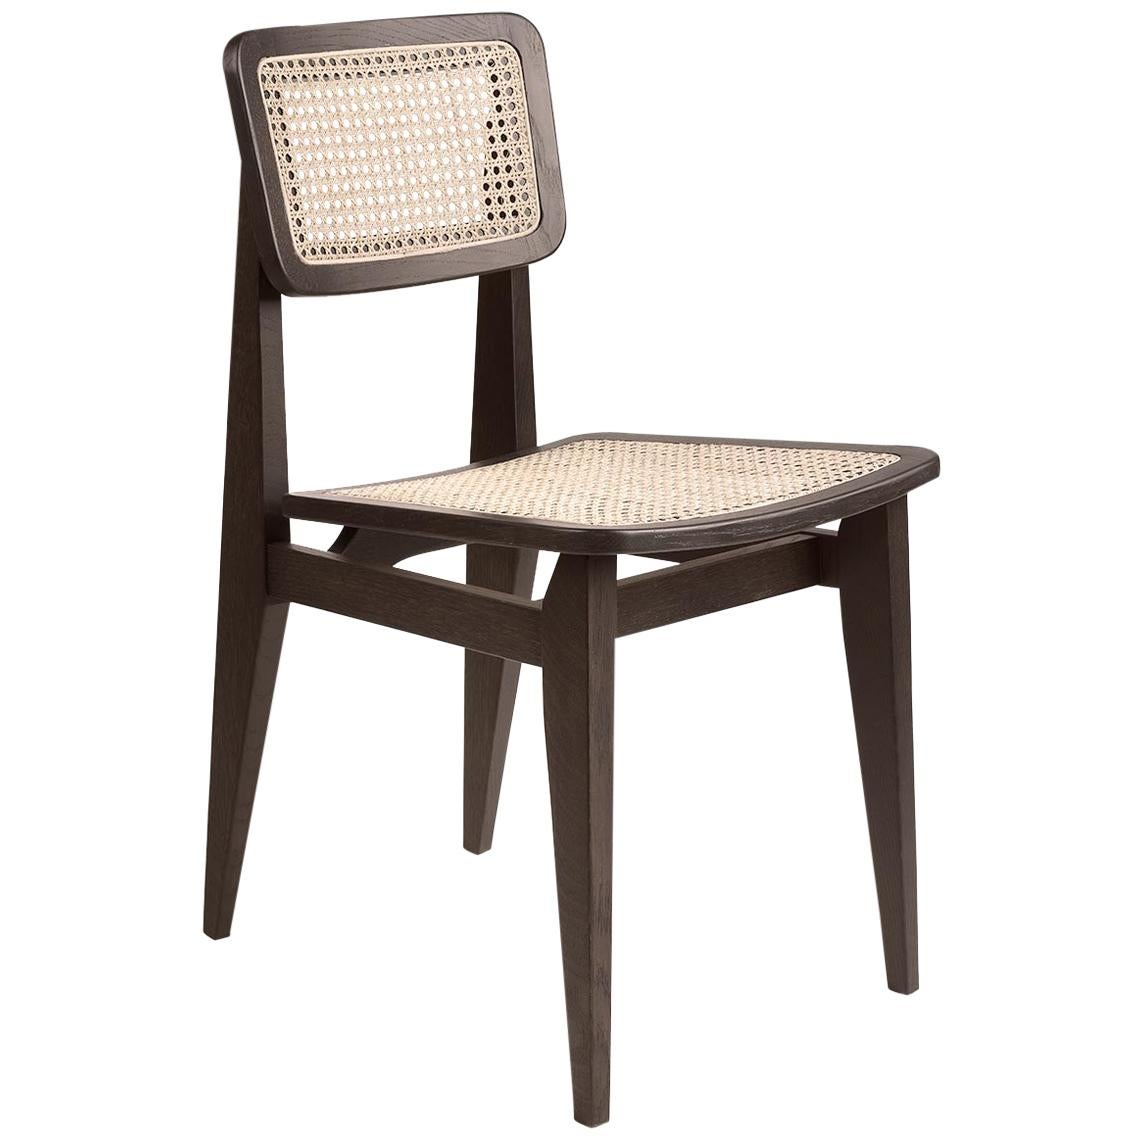 C-Chair Dining Chair, French Cane, Brown Stained Oak